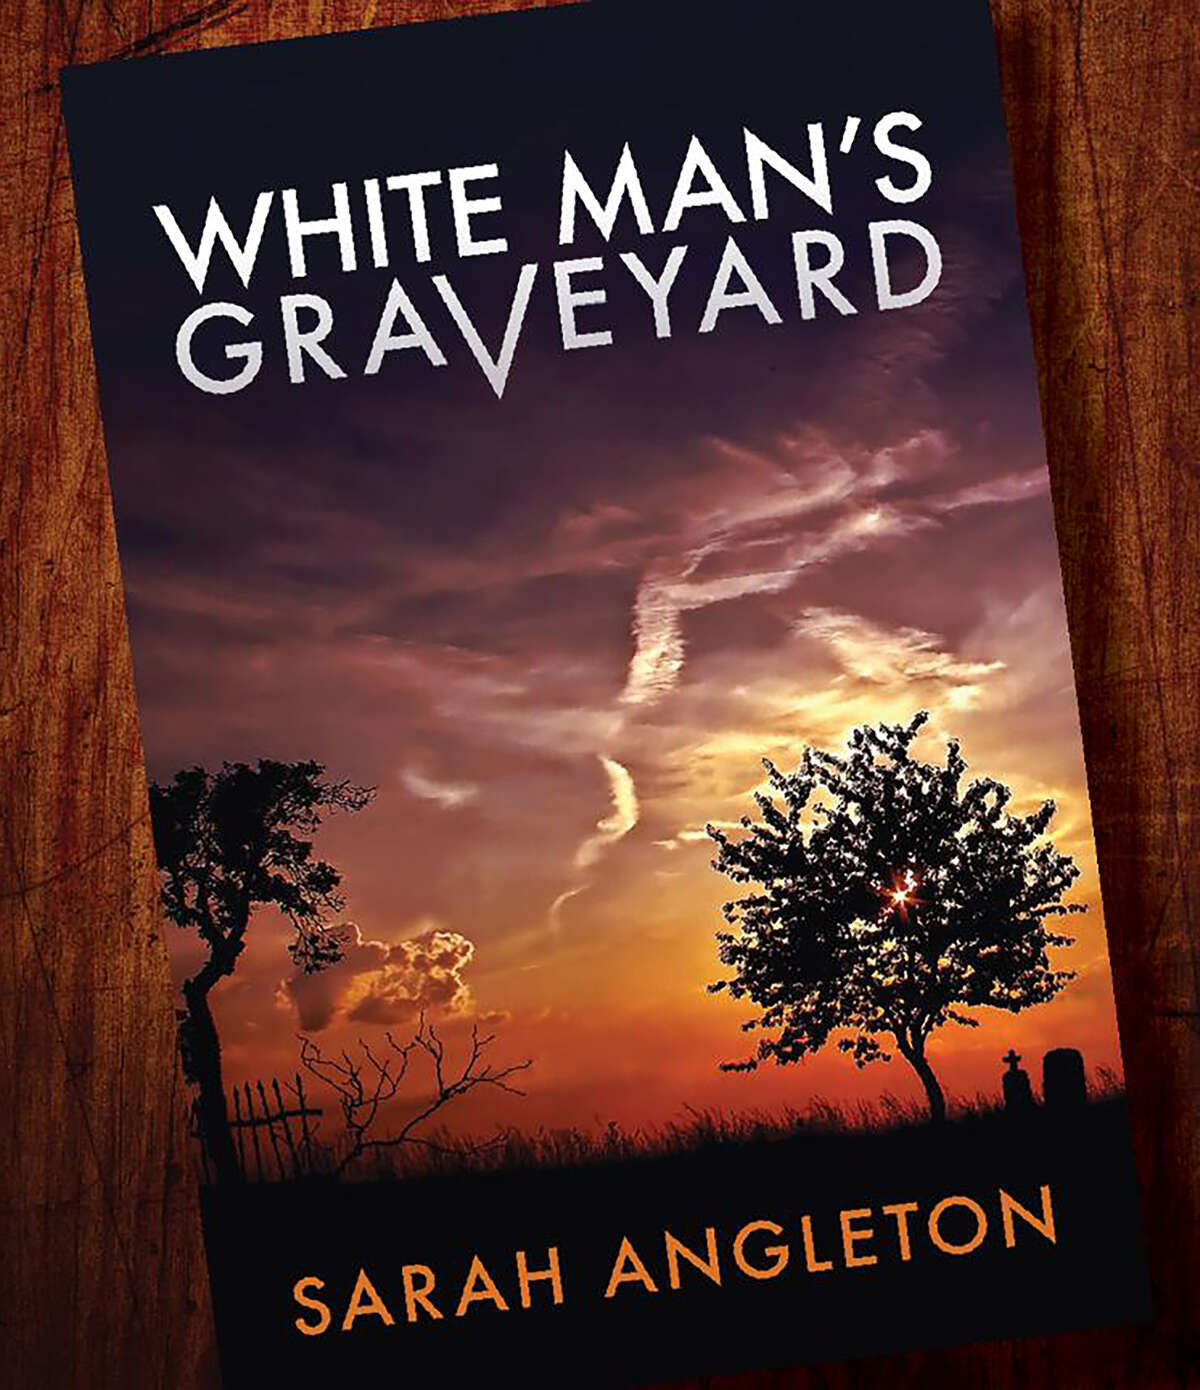 Jacksonville native and author Sarah Angleton's latest book is 